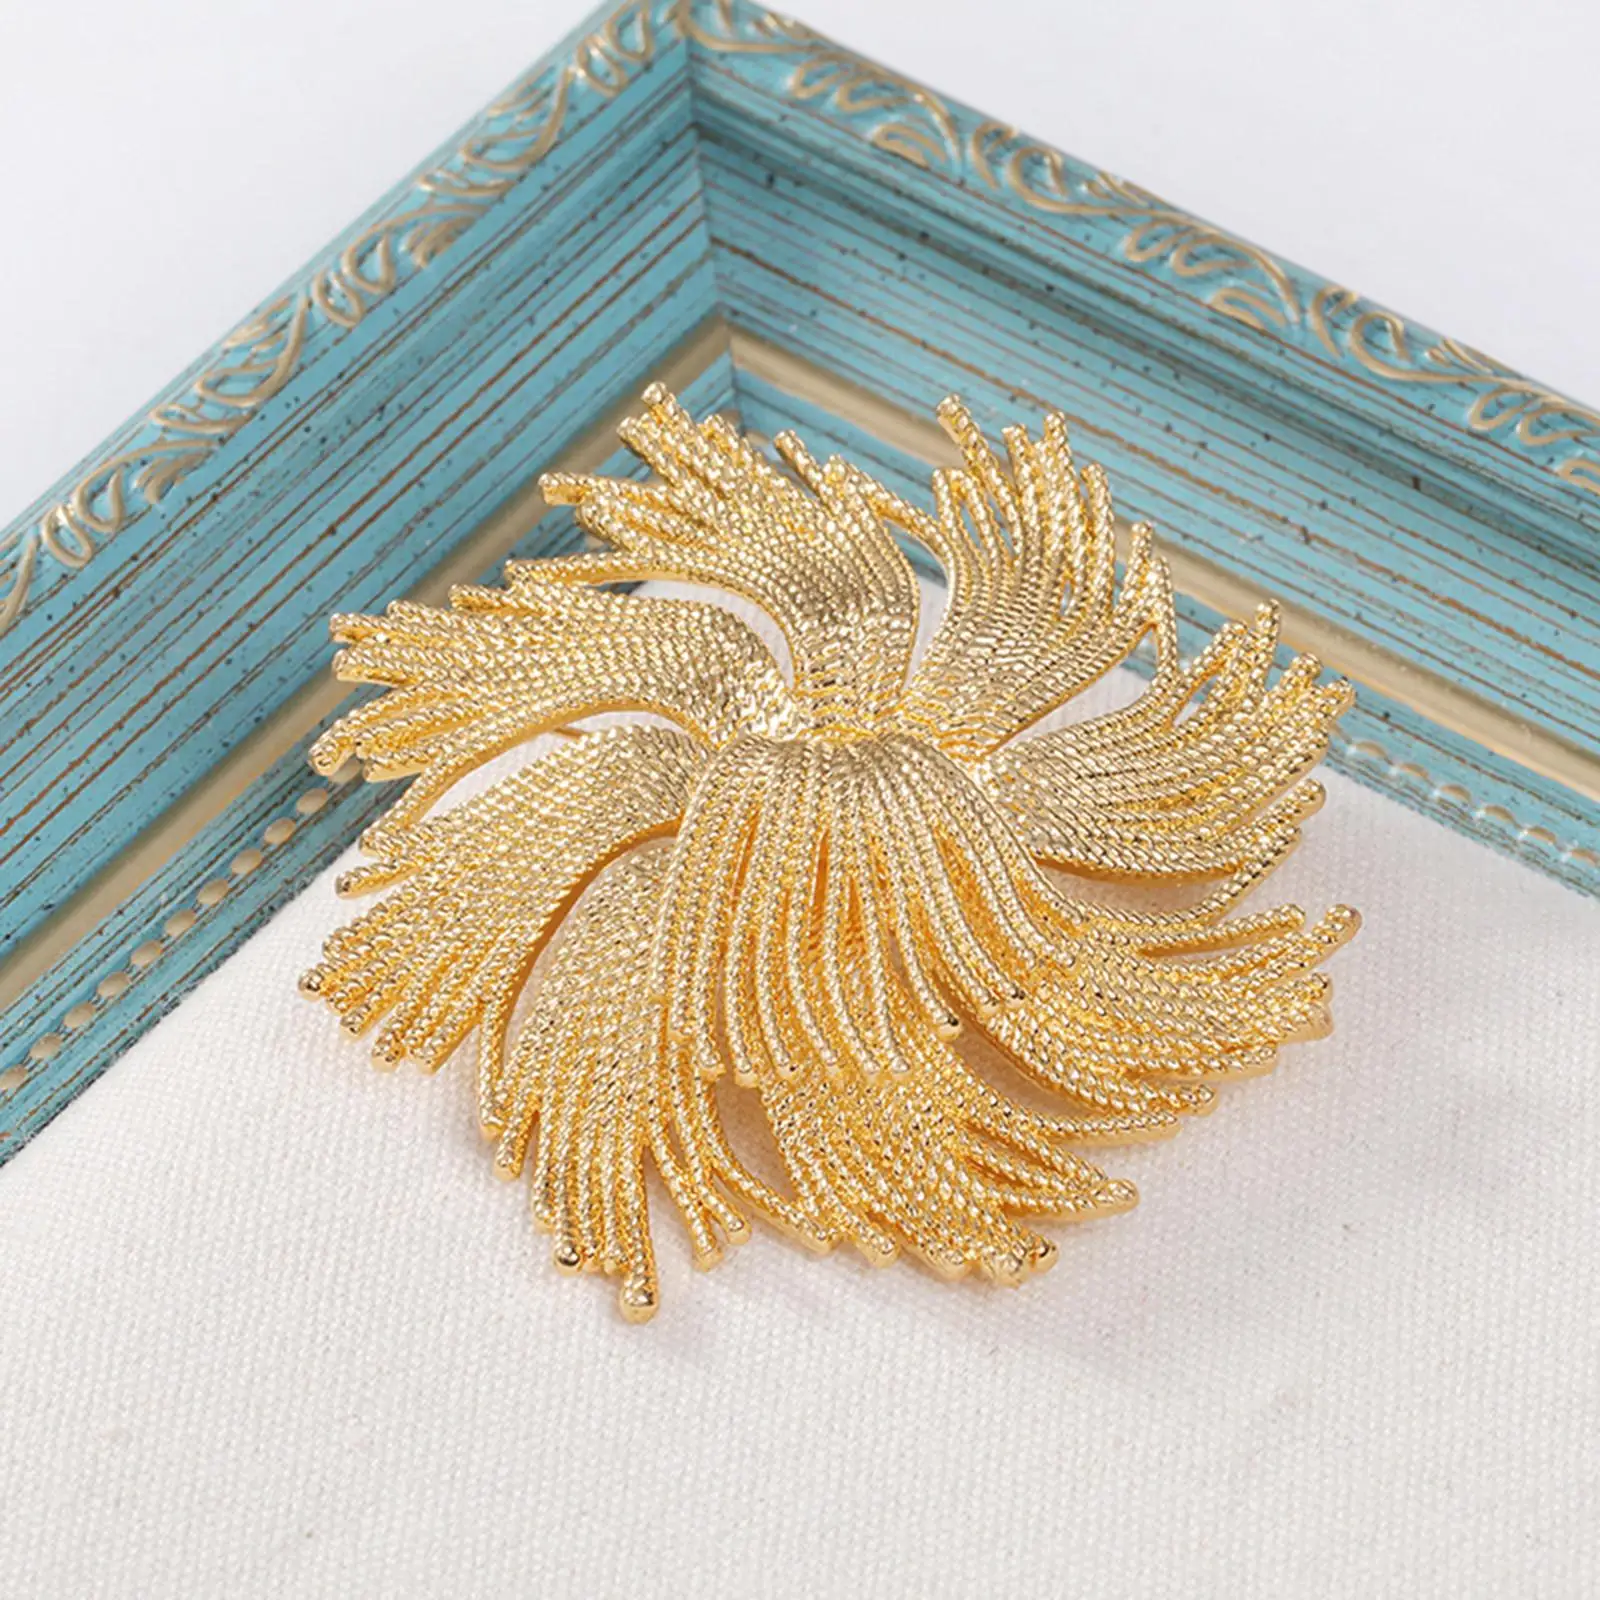 Flower Brooch Gold Plated Lapel Pin Fireworks Brooch for Hats Shirts Coats Scarf Jewelry Birthday Gifts for Wife Mom Friends